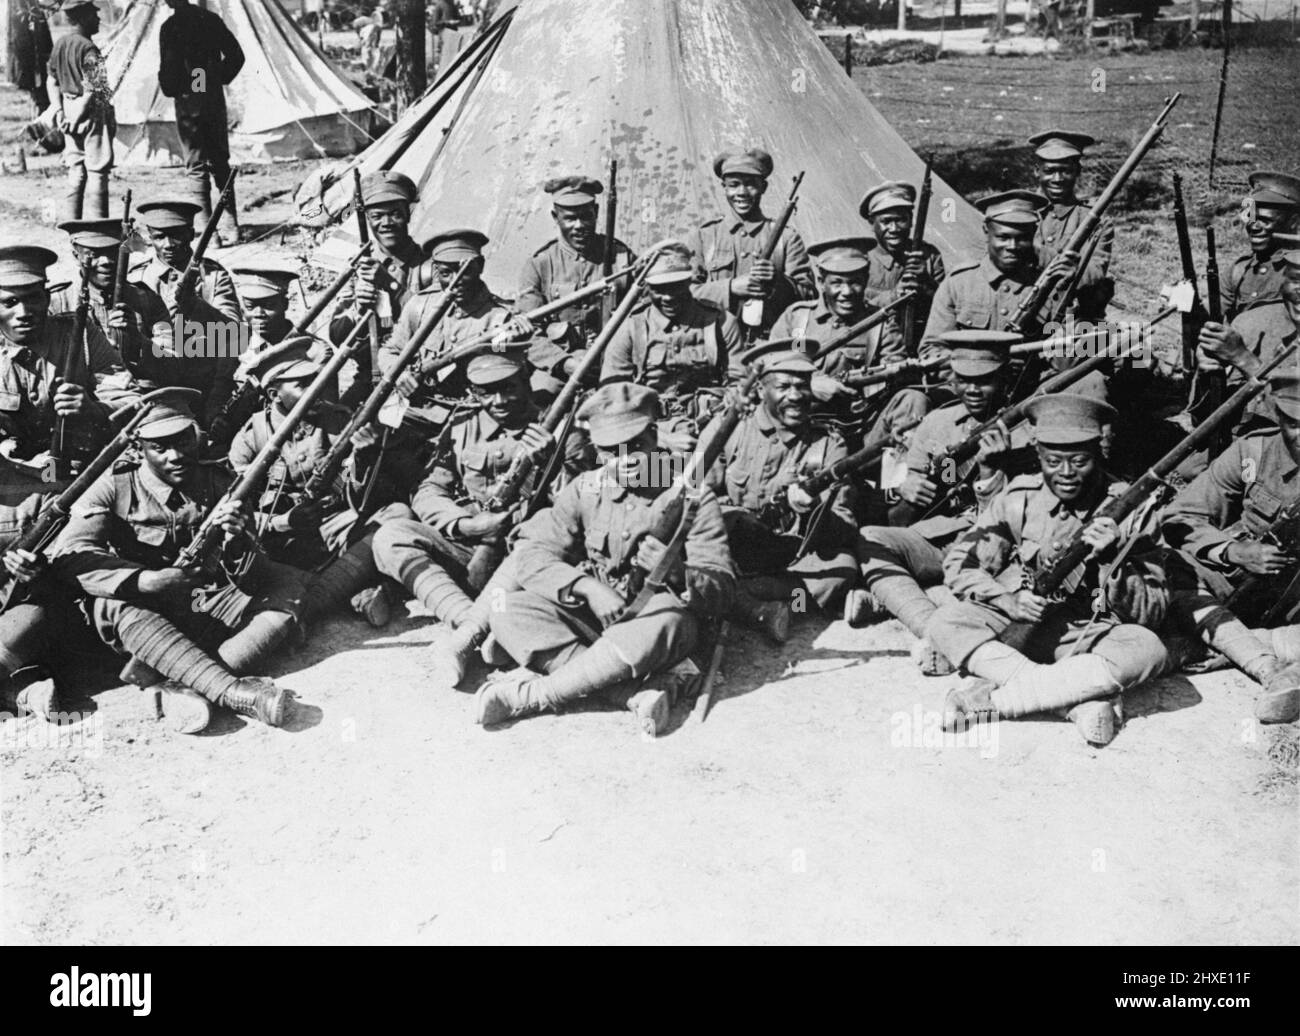 Somme 1916 british troops Black and White Stock Photos & Images - Alamy